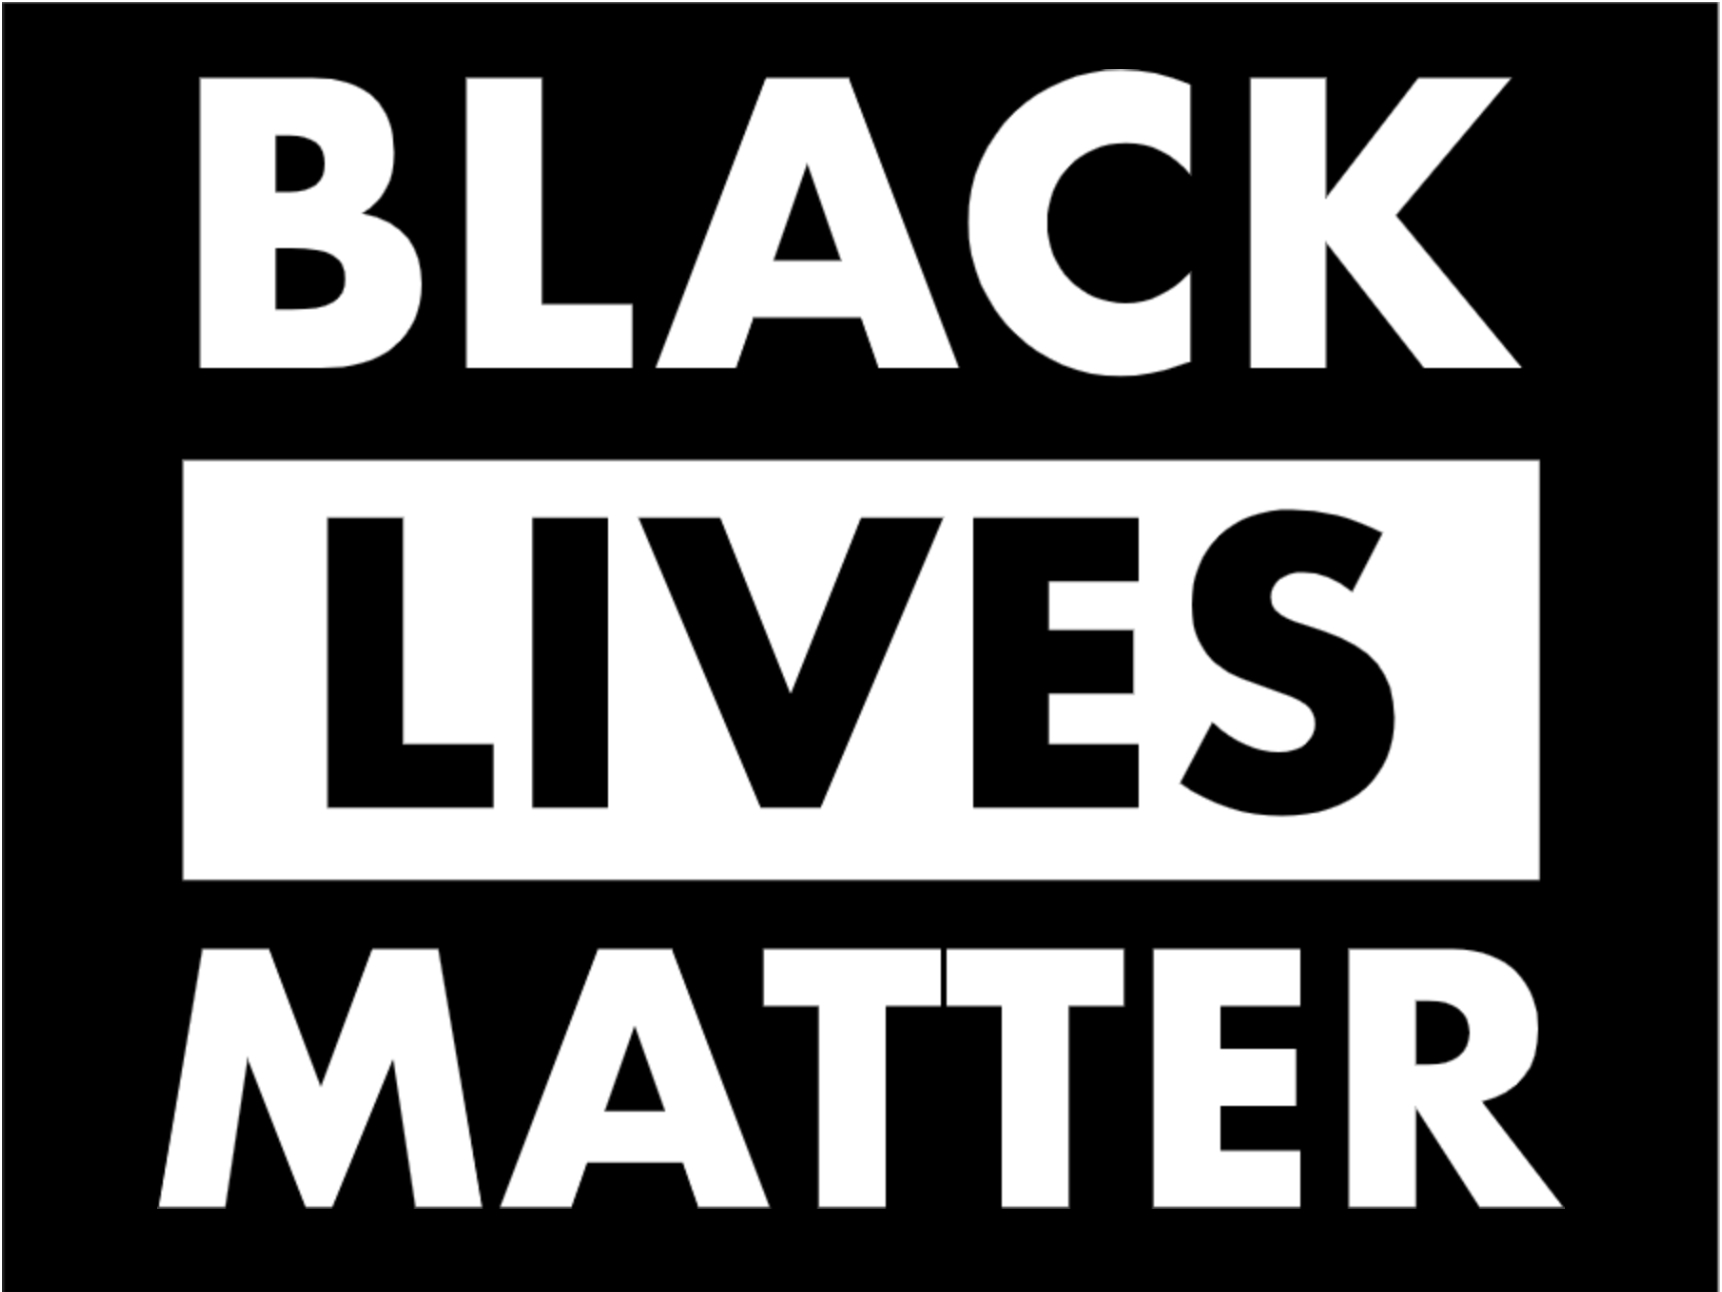 Yard Sign, Social Issues - Tags: blm, black, lives, matter, unite, united, social, justice, issues, sjw